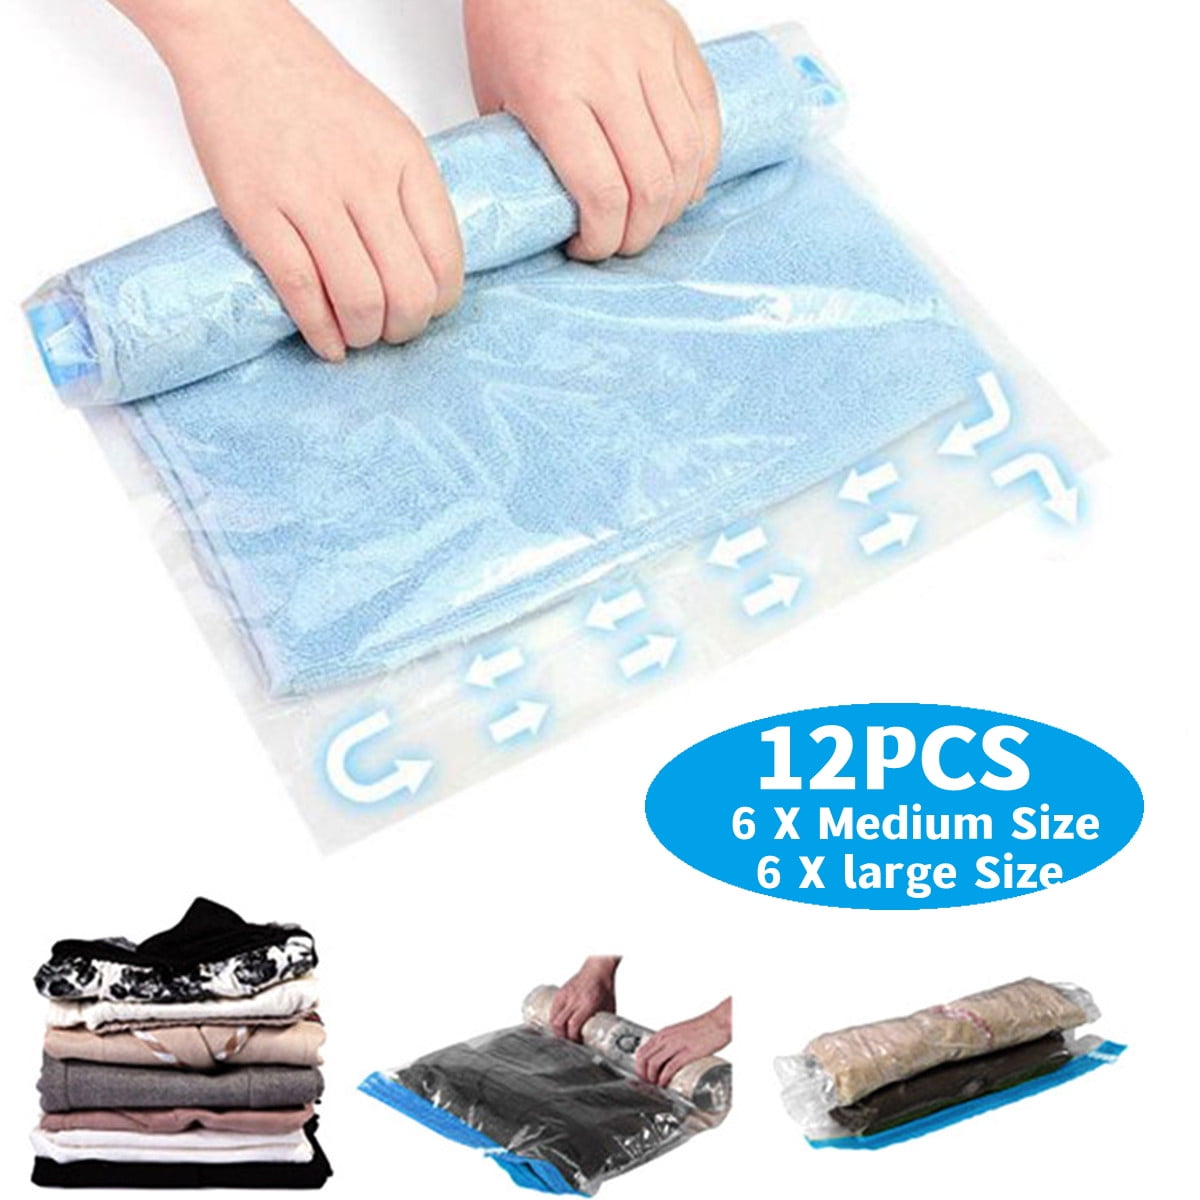 10P travel compression bags for packing, Travel vacuum bags with pump,  space bags vacuum storage bags for clothing, packing bags for suitcases,  cruise